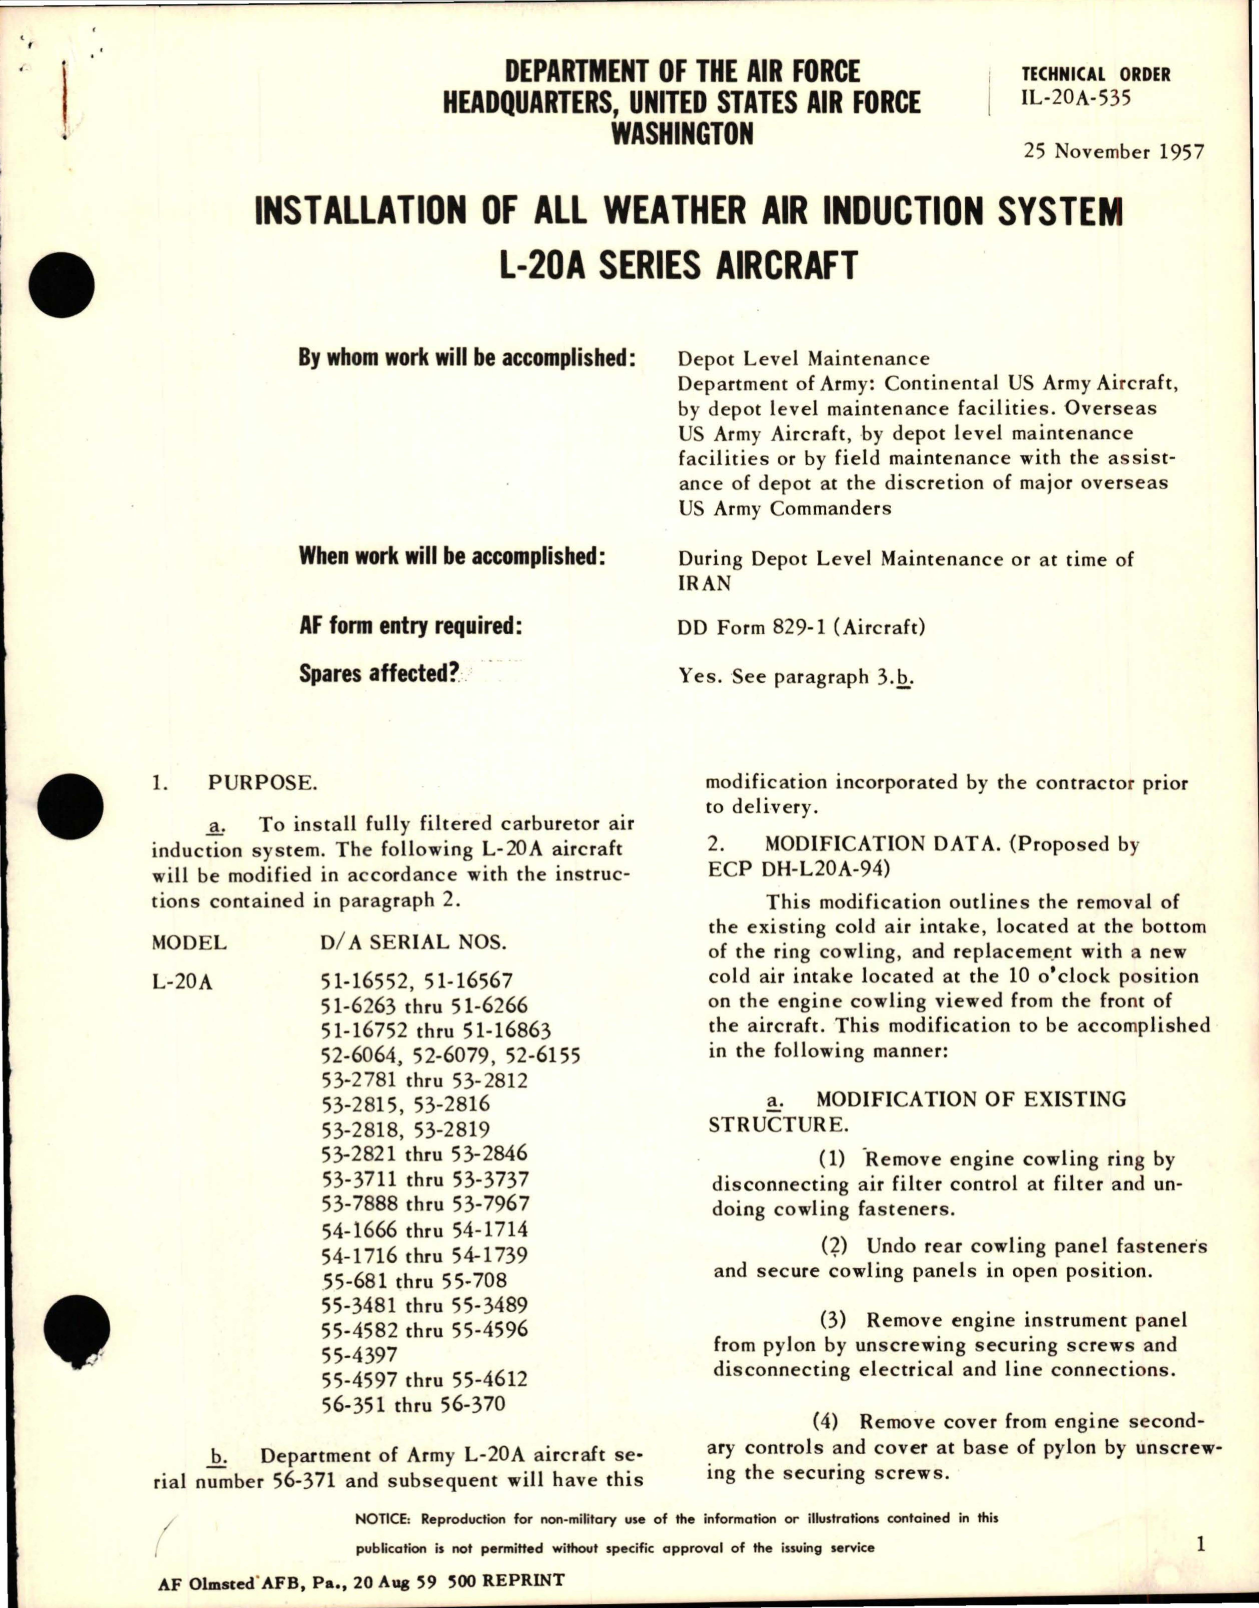 Sample page 1 from AirCorps Library document: Installation of All Weather Air Induction System - L-20A Series